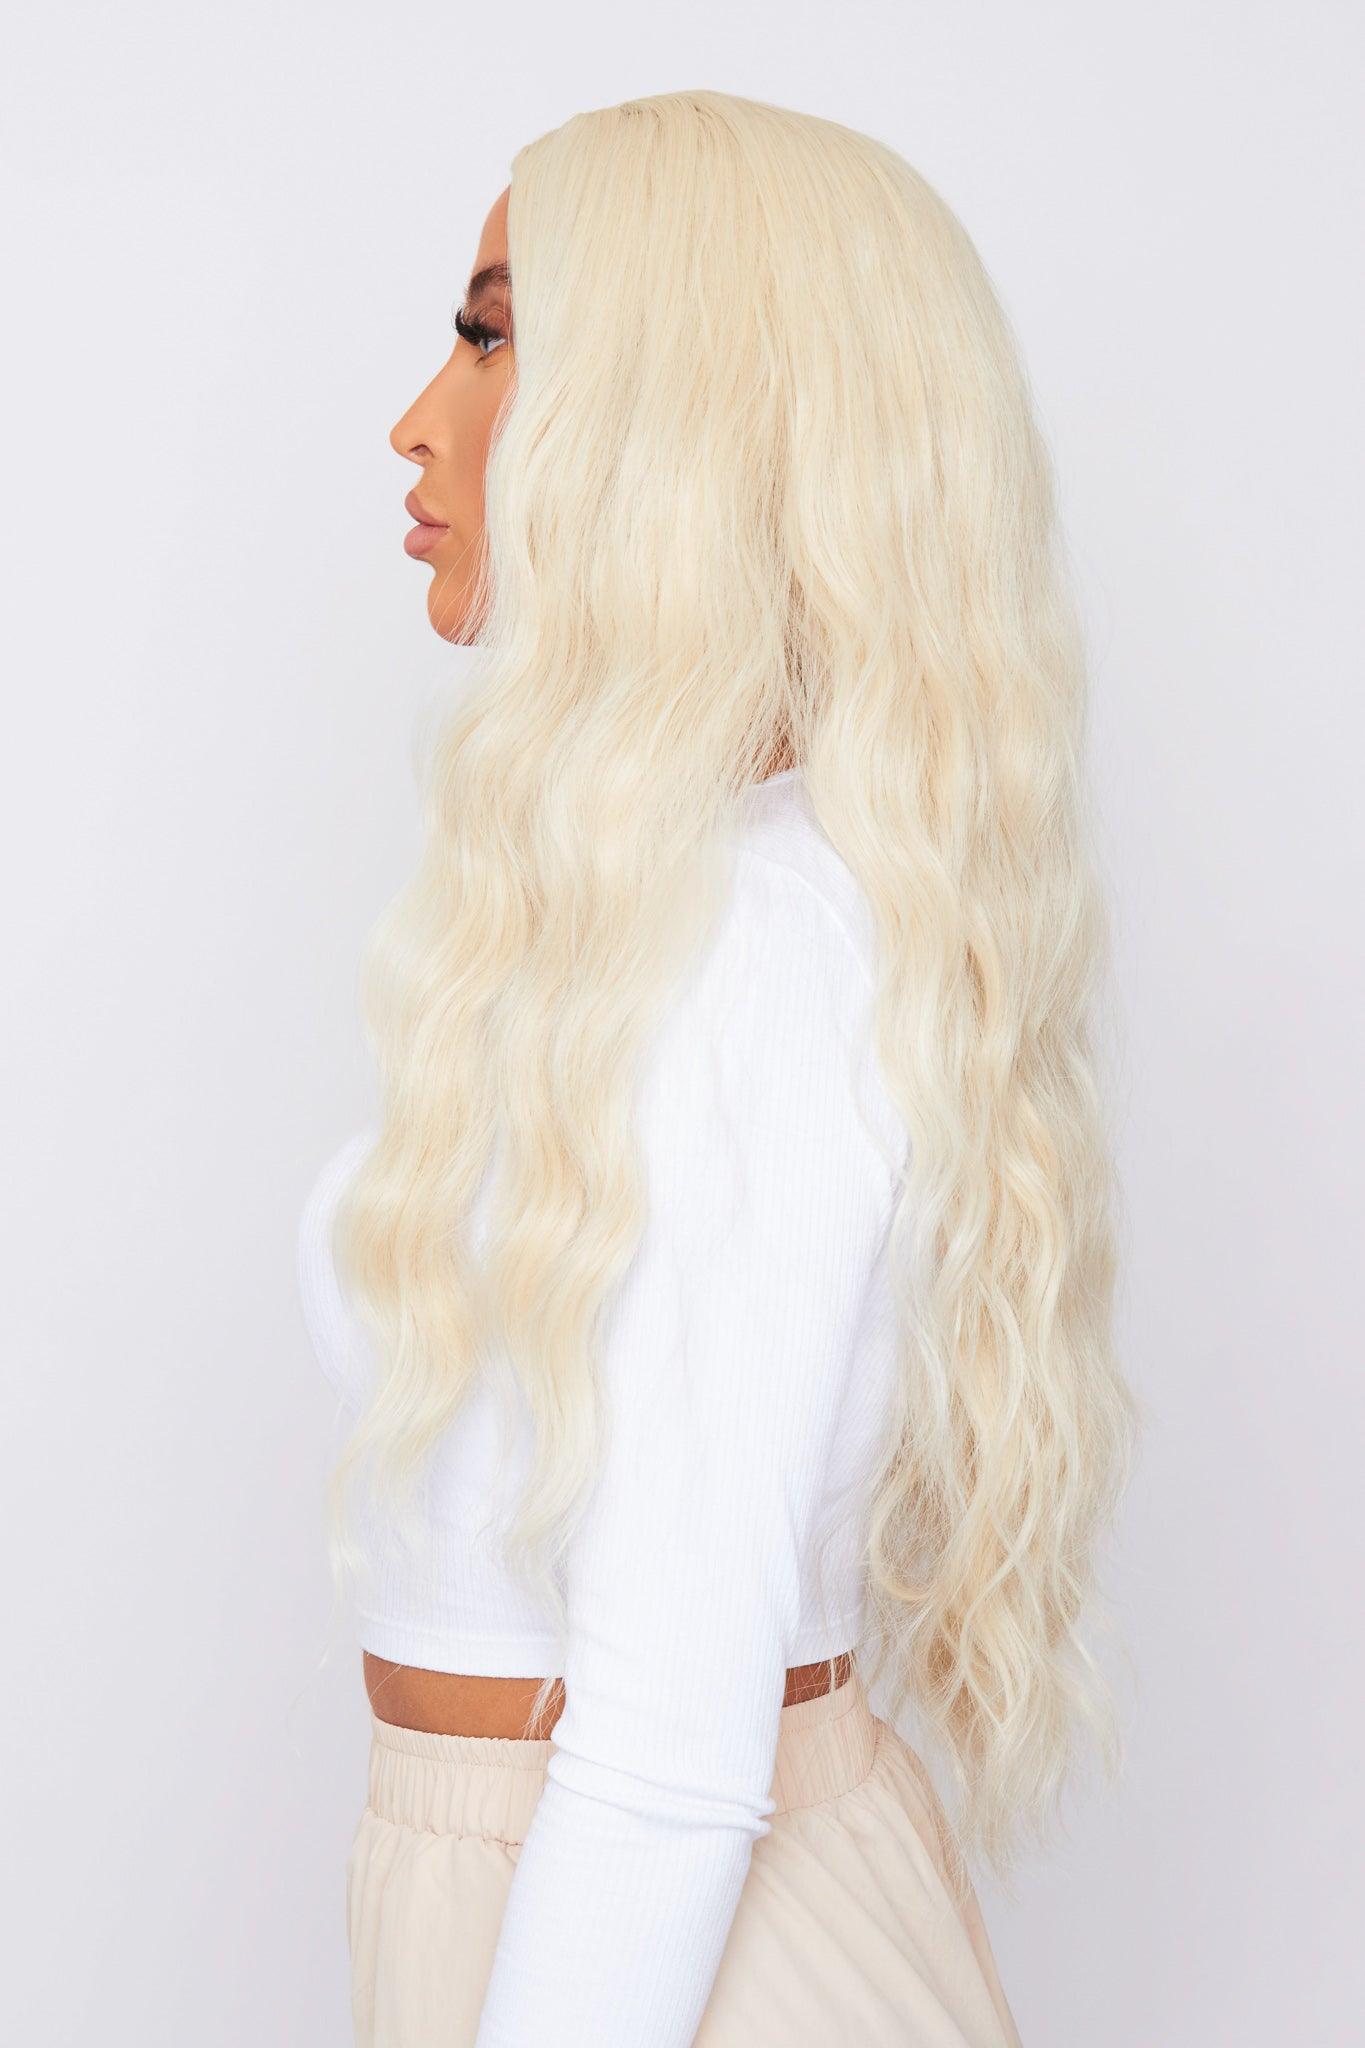 bleach blonde synthetic hair wig being worn by female from hair brand pbeauty hair